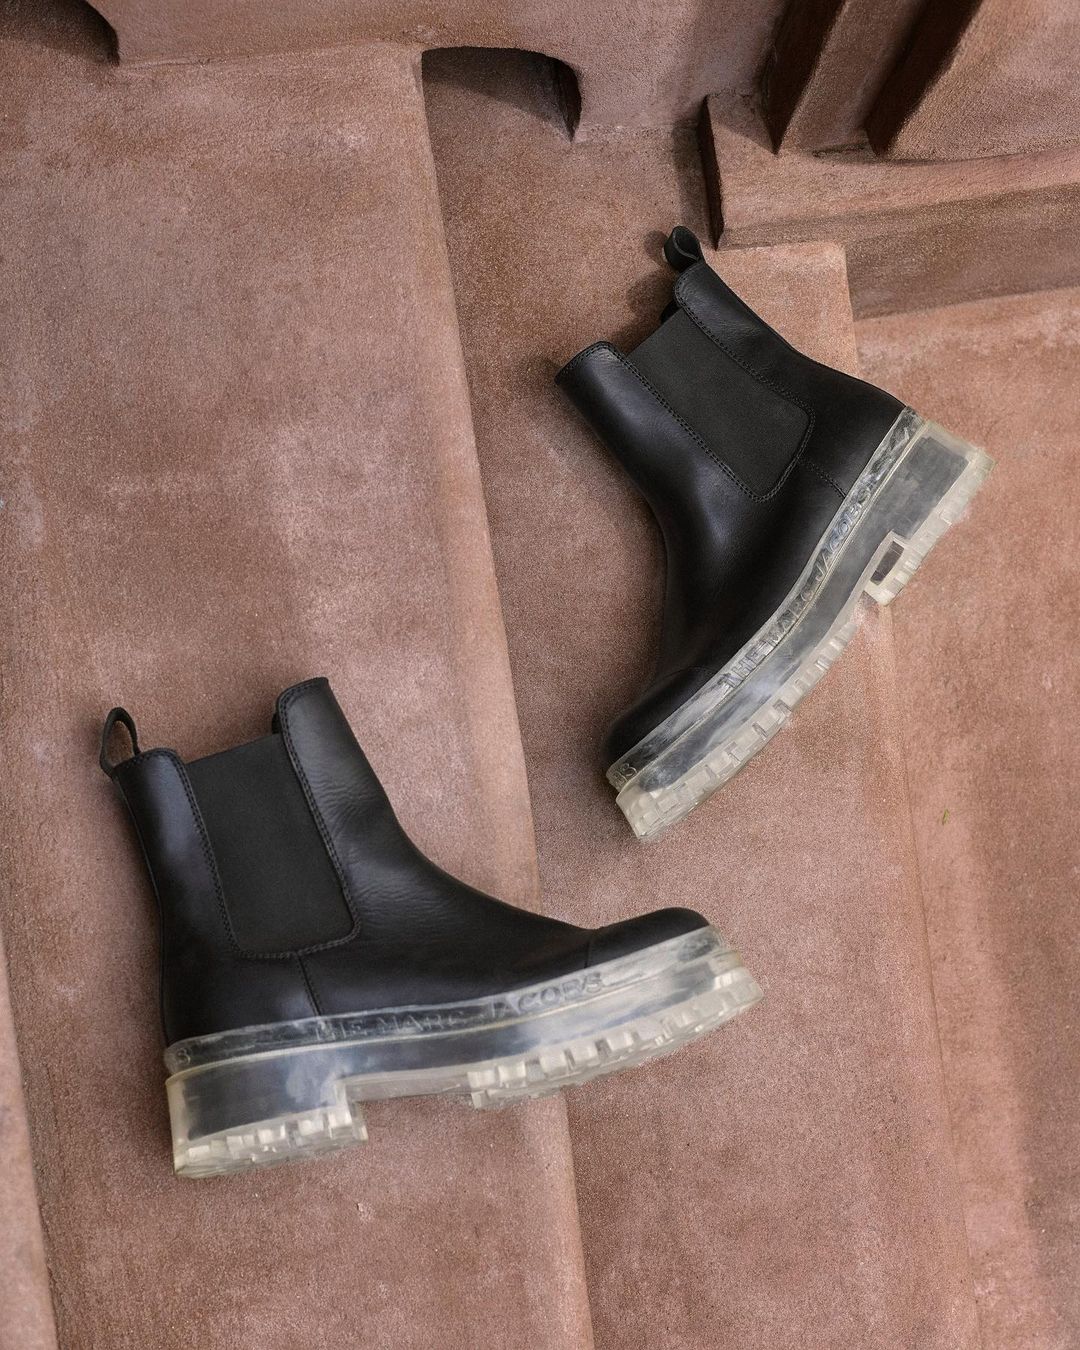 Marc Jacobs - Step Forward. THE BOOT from THE MARC JACOBS.

Photographed by @CoreyOlsen

August 21, 2020 in New York City.